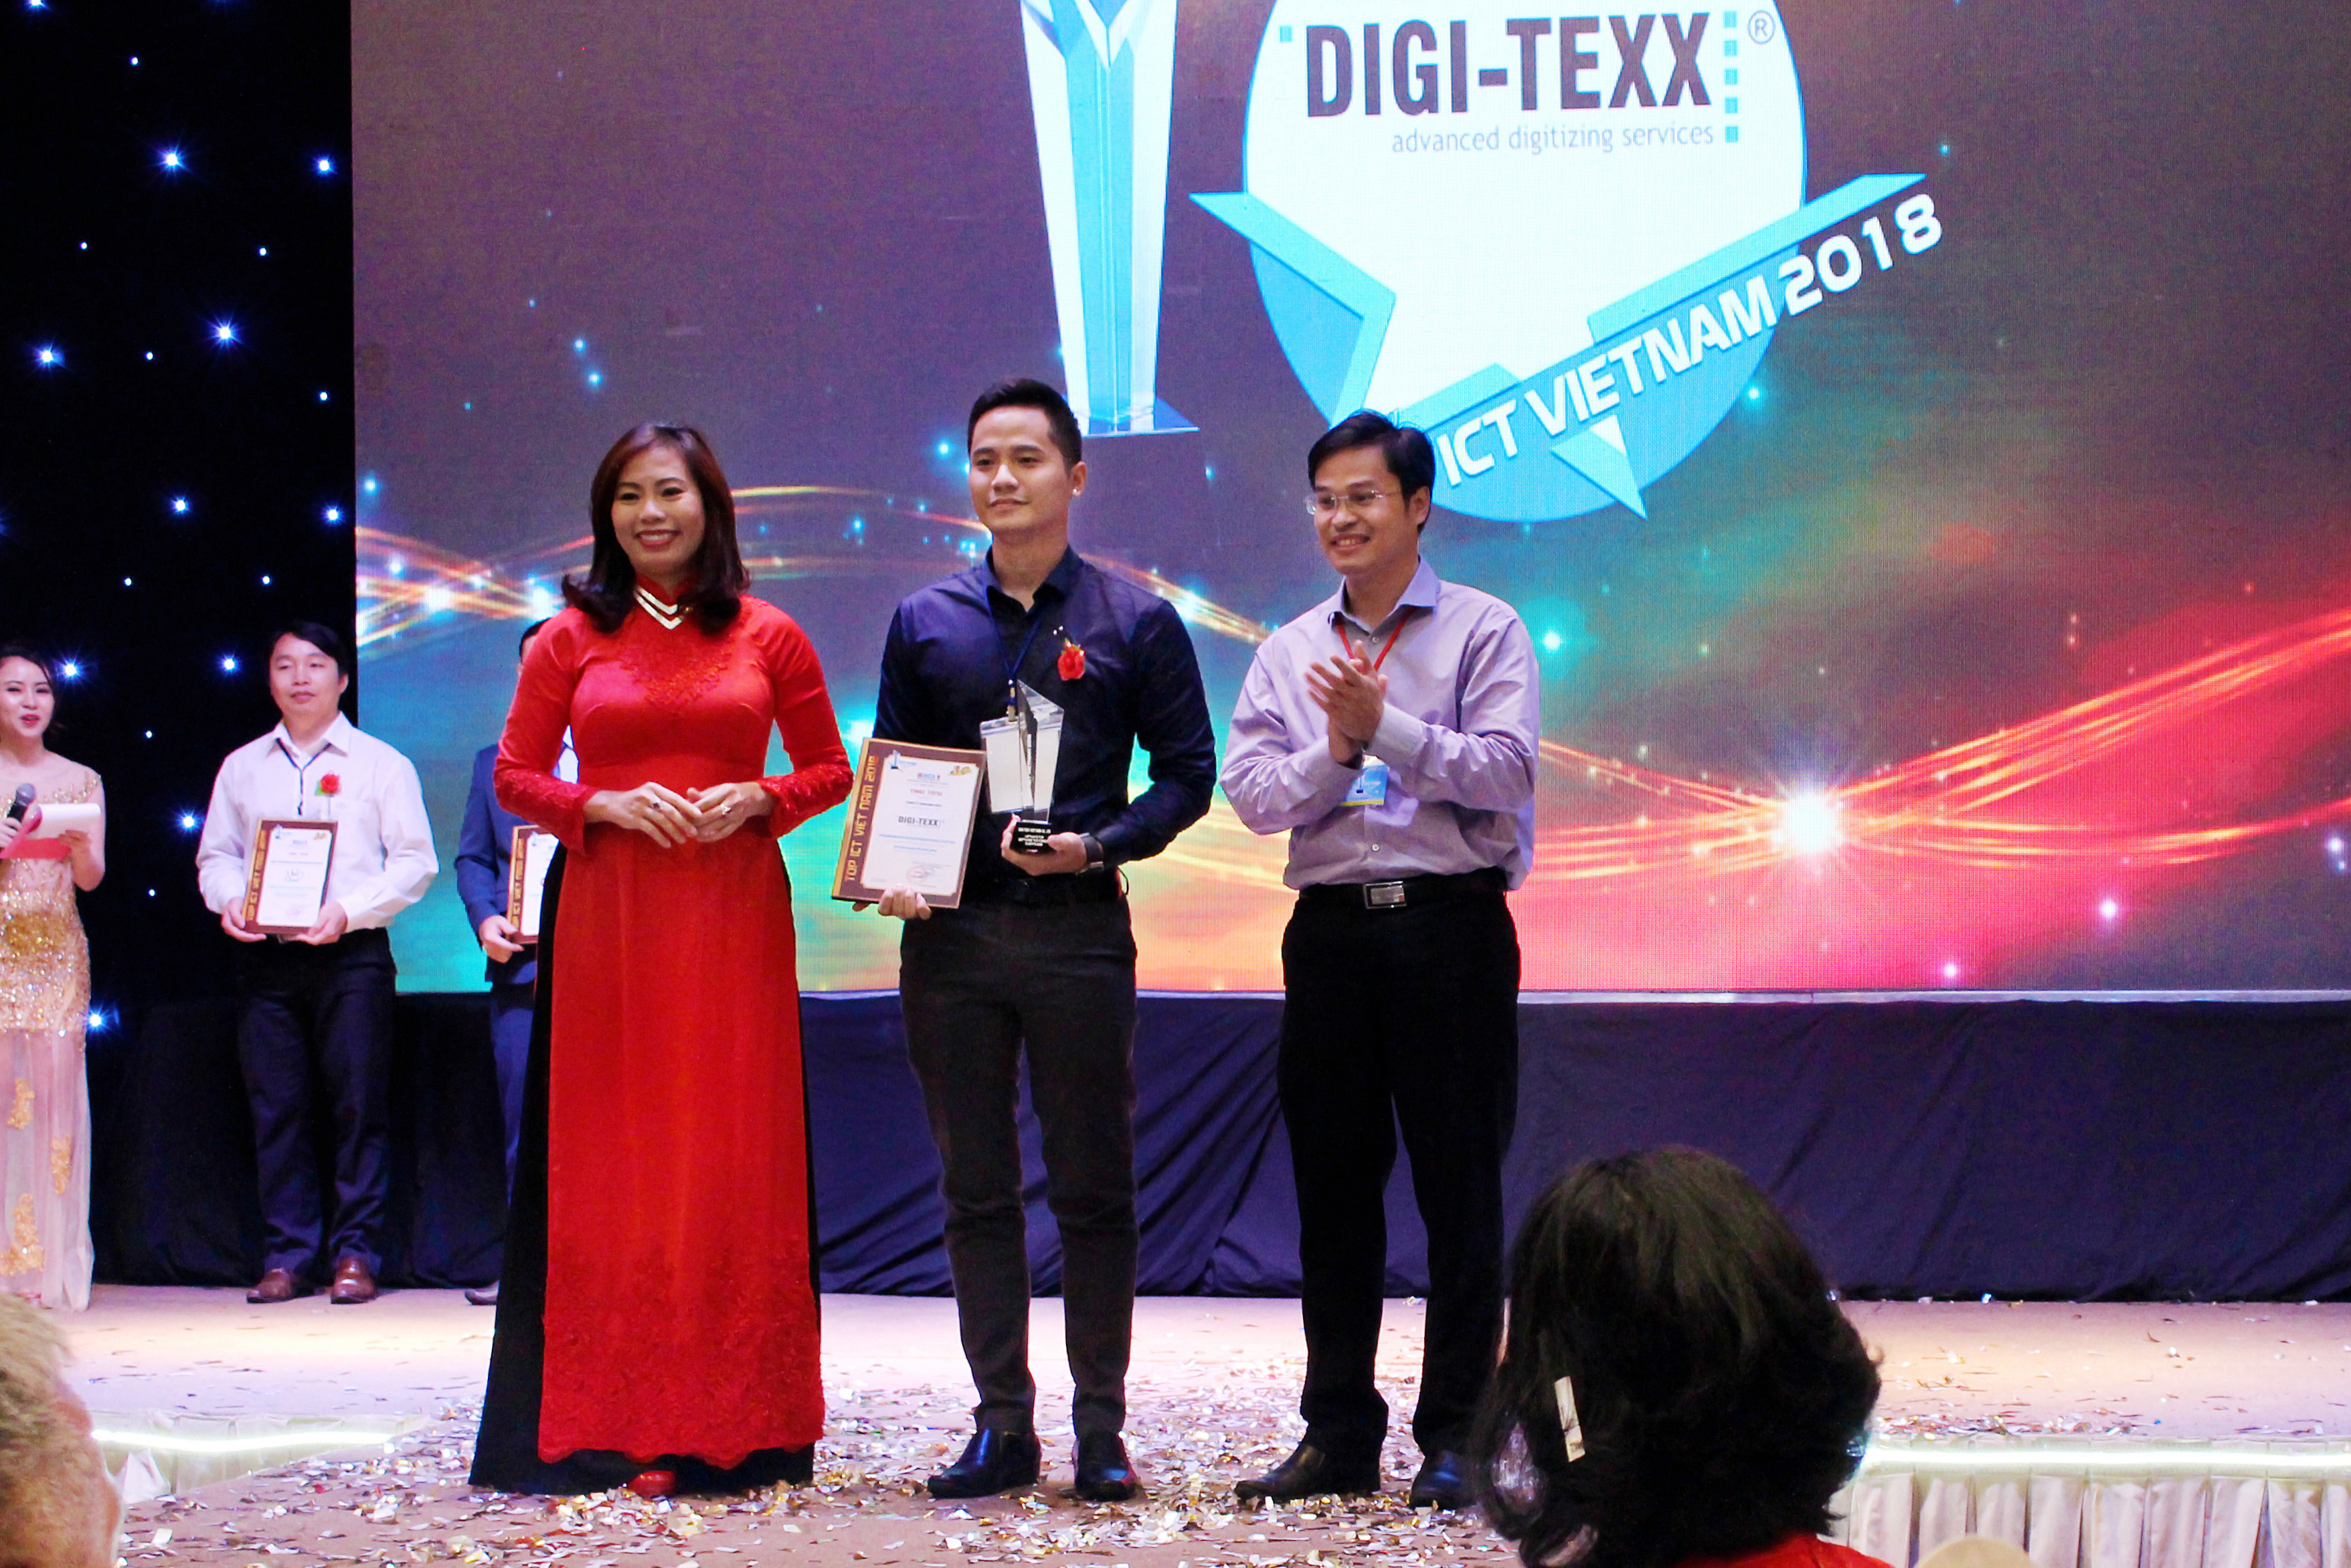 DIGI-TEXX was honored at Vietnam Top ICT Award 2018